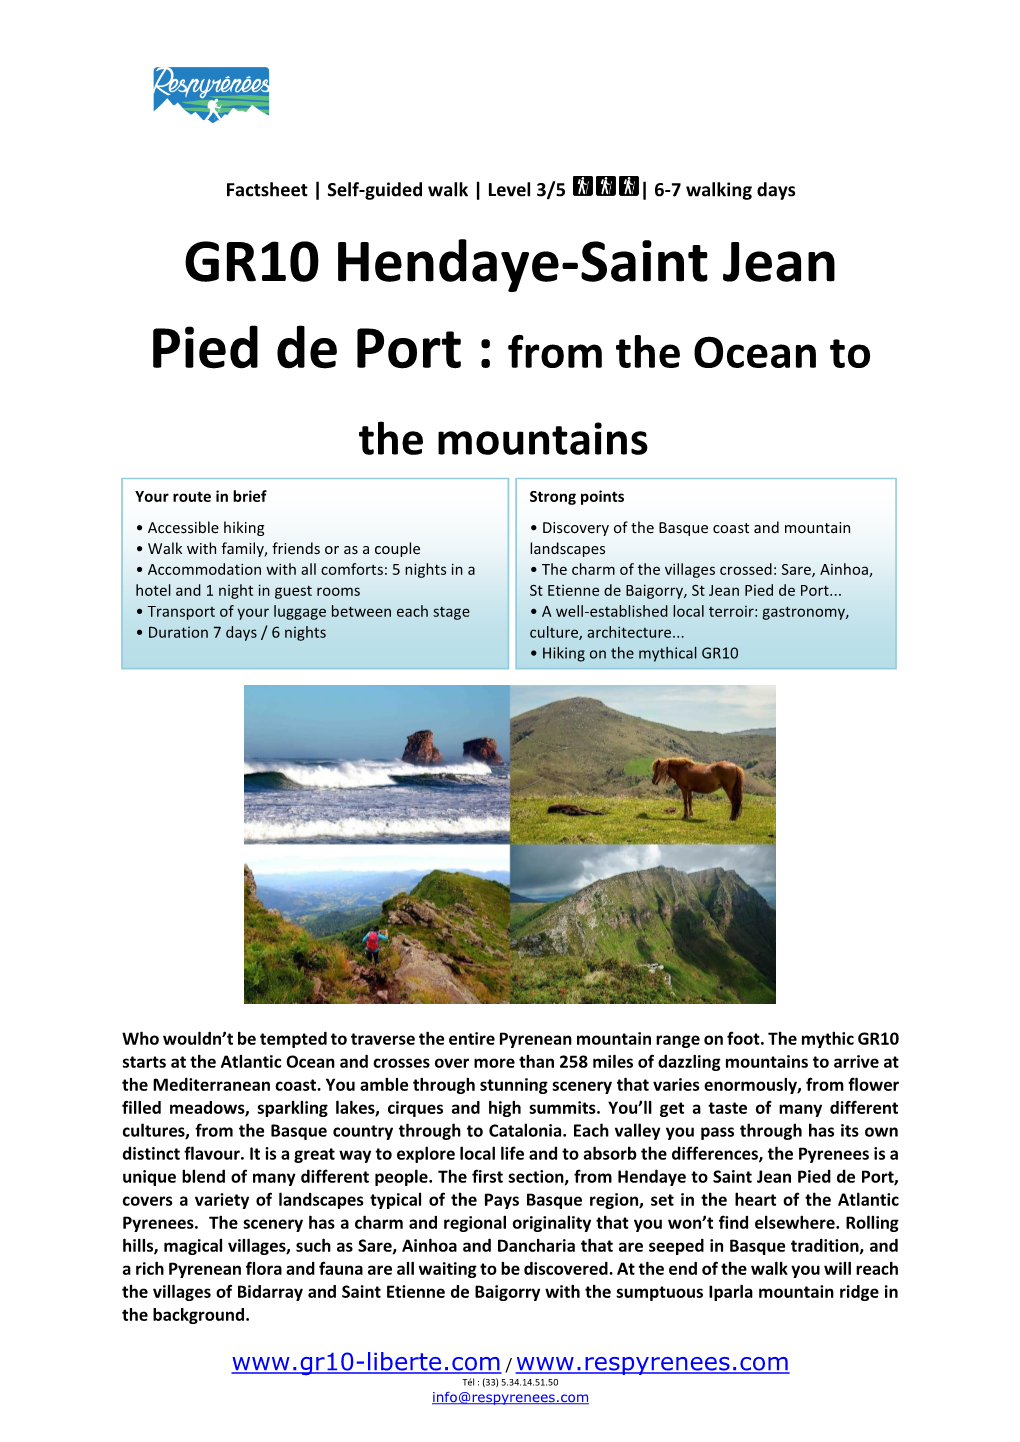 GR10 Hendaye-Saint Jean Pied De Port : from the Ocean to the Mountains